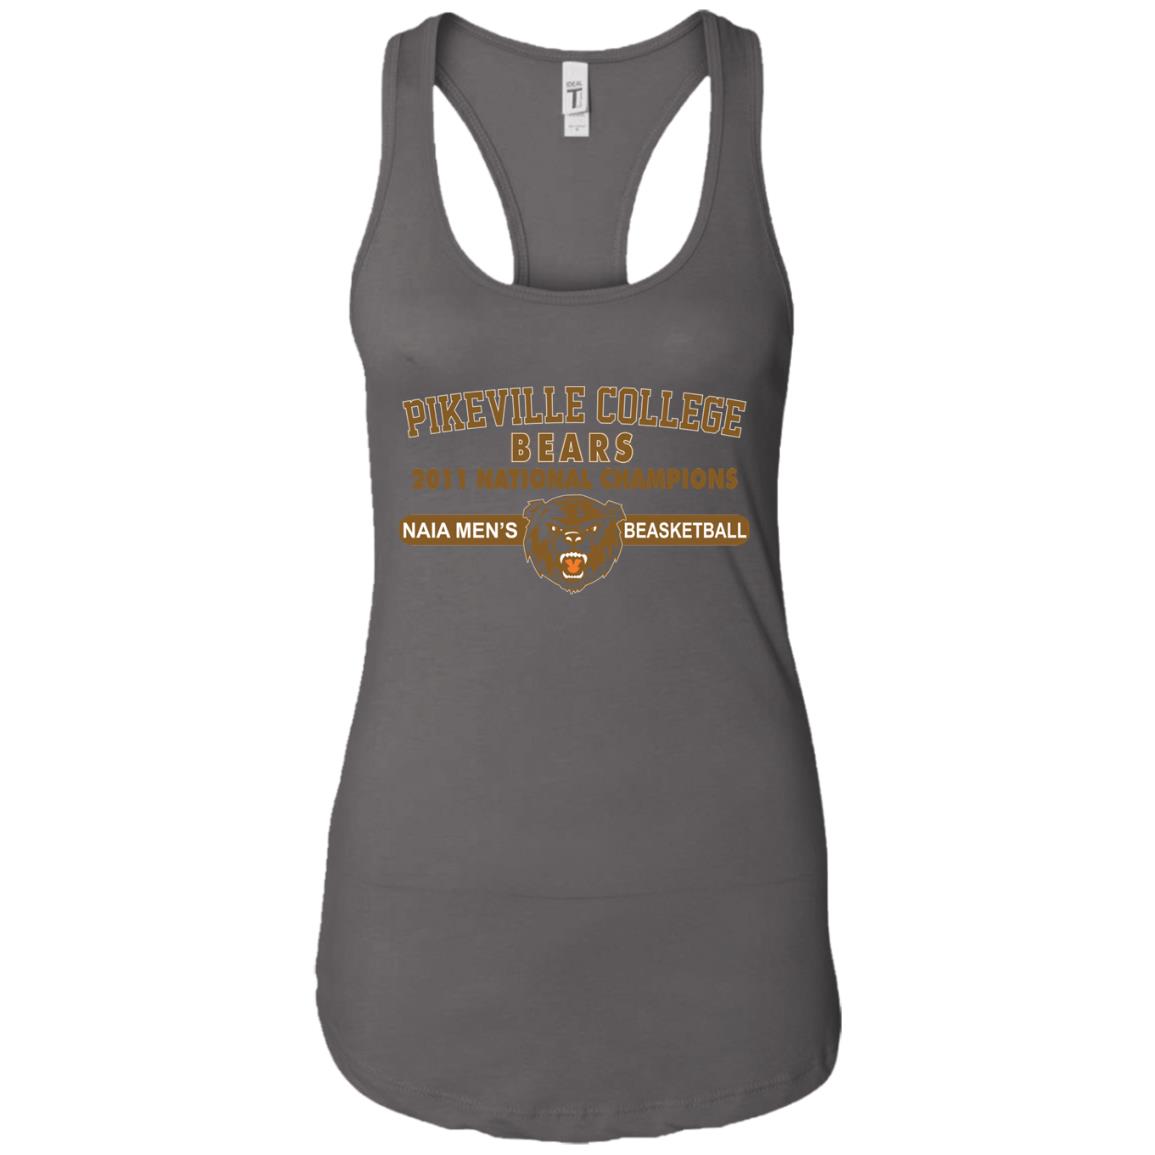 Pikeville College Bears 2011 national champions shirt, hoodie, ladies tee